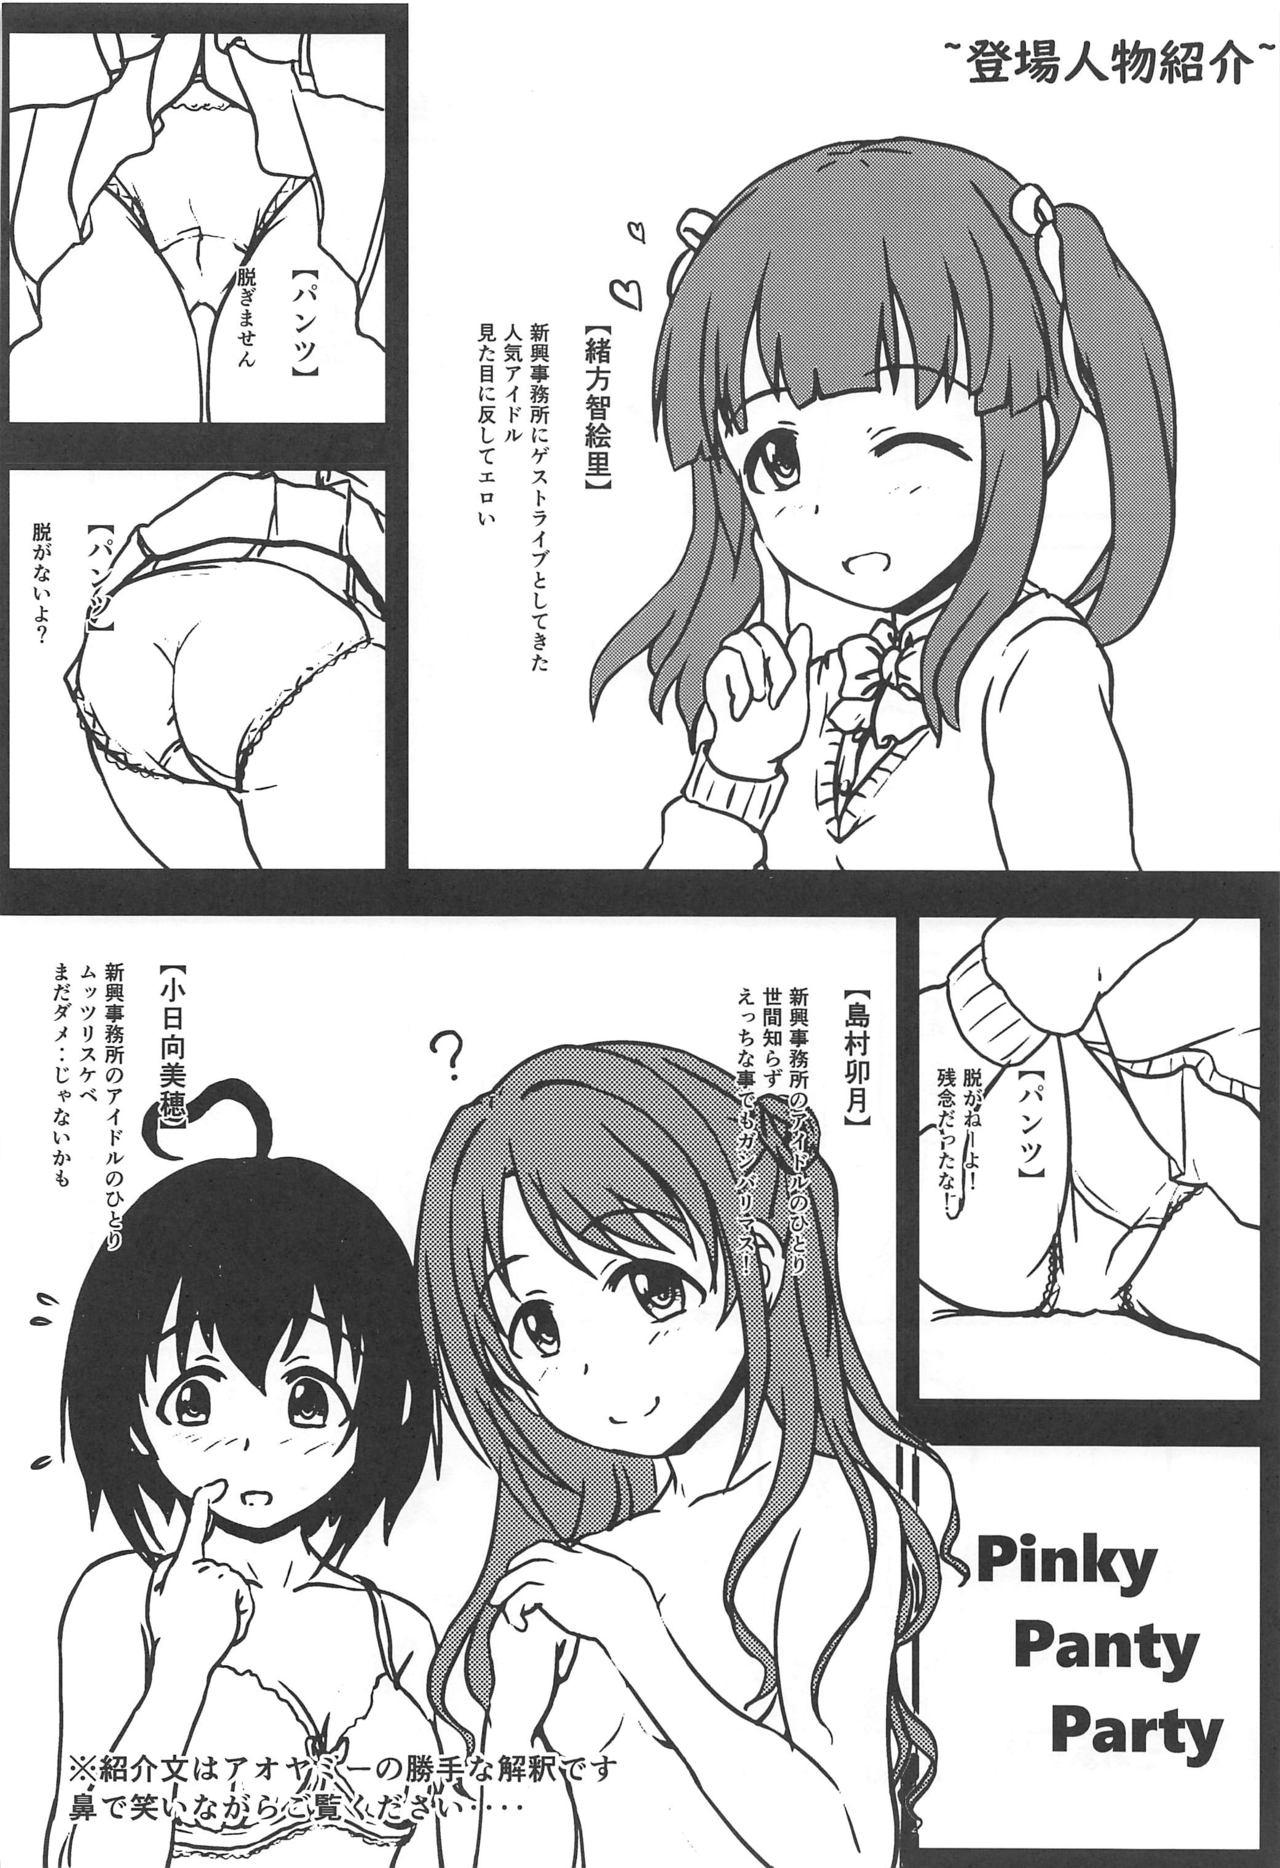 Group Pinky Panty Party - The idolmaster Casting - Page 3